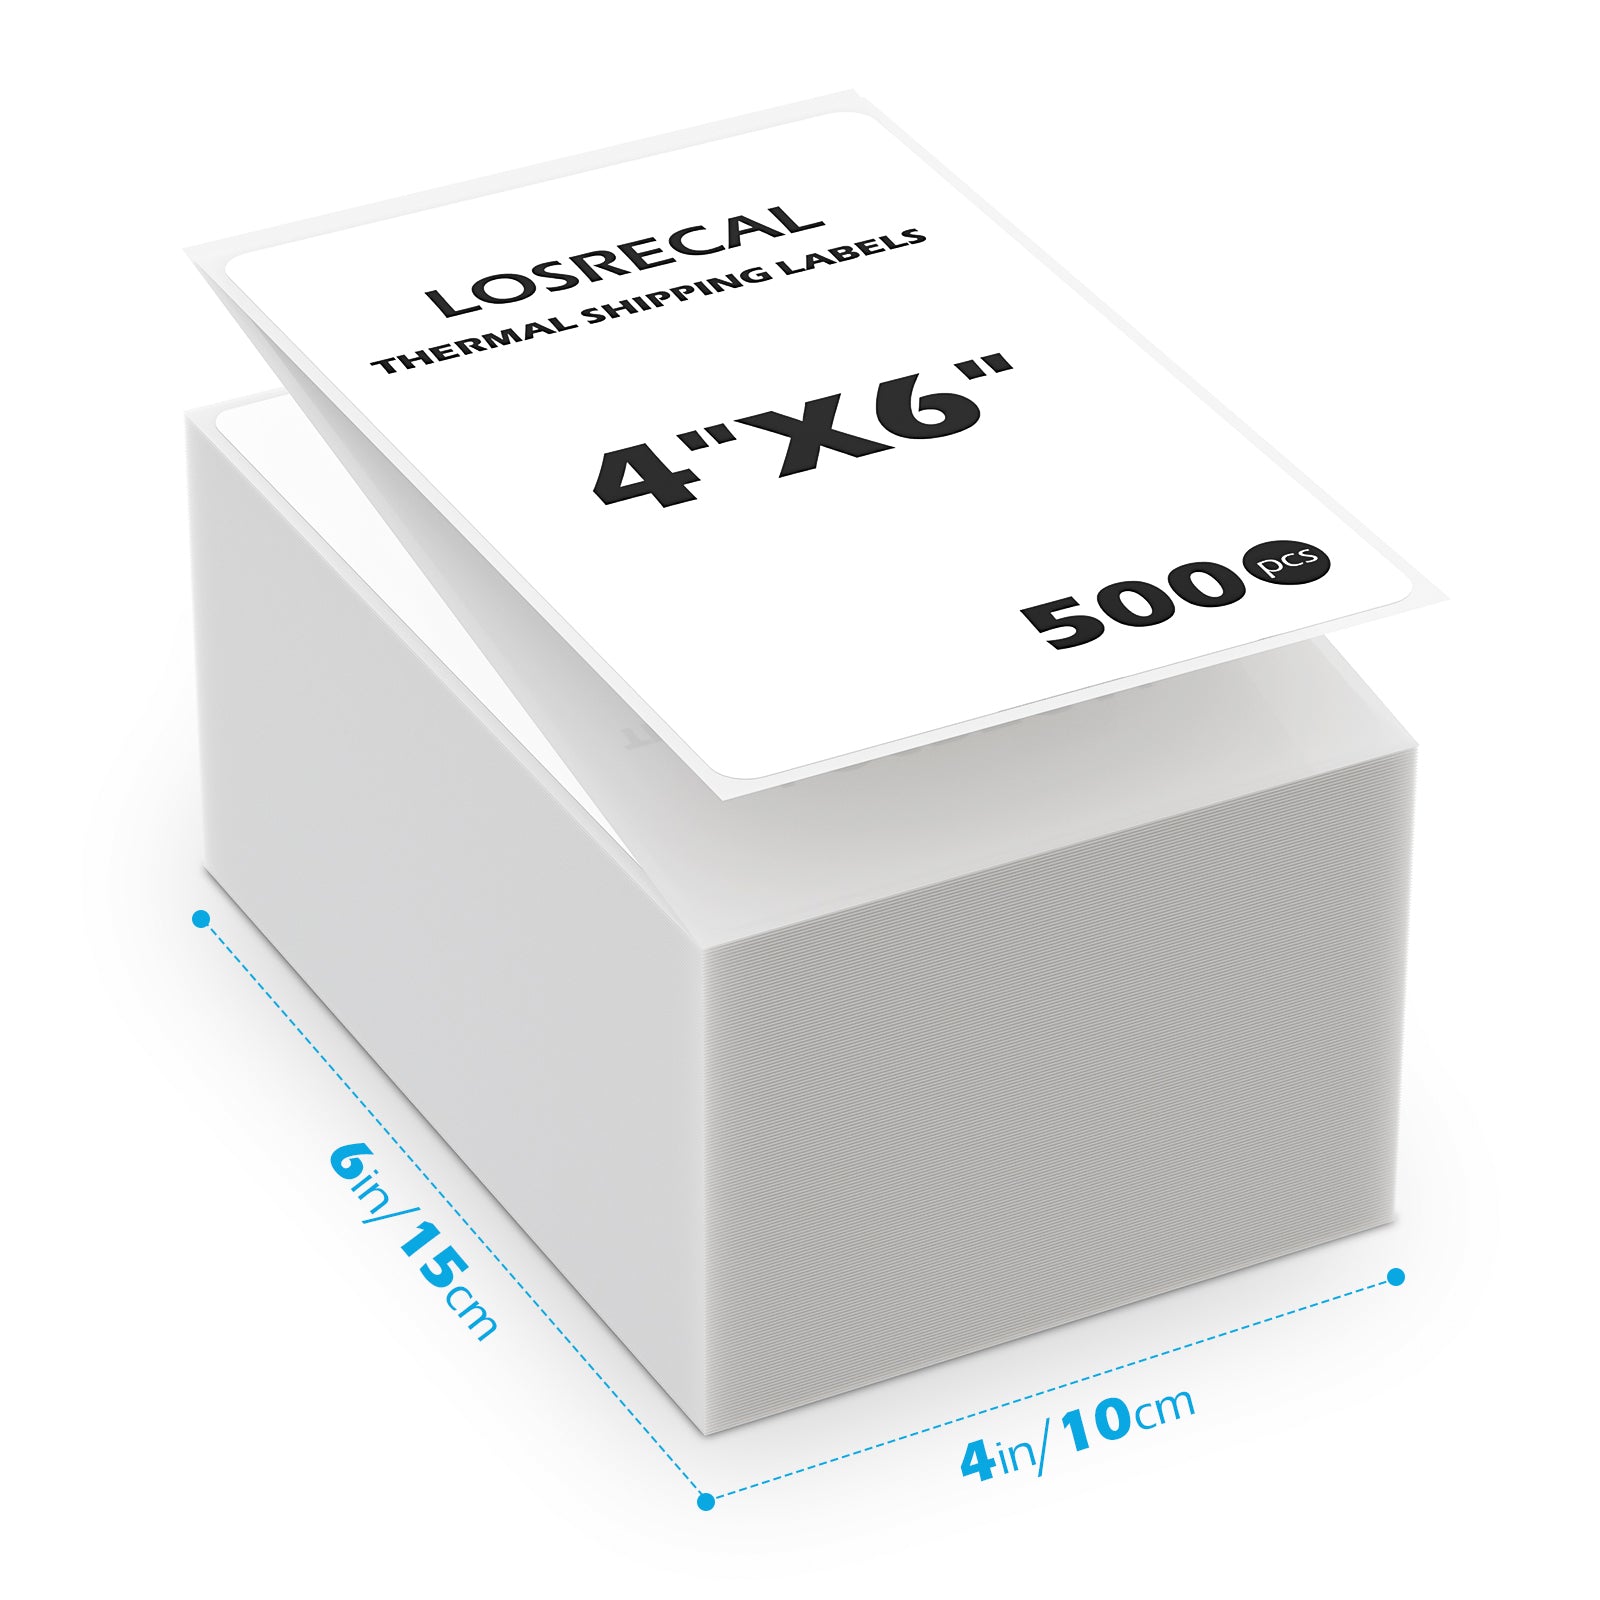 LOSRECAL 4x6 Shipping Label, 500 Fan-Fold Thermal Direct Labels